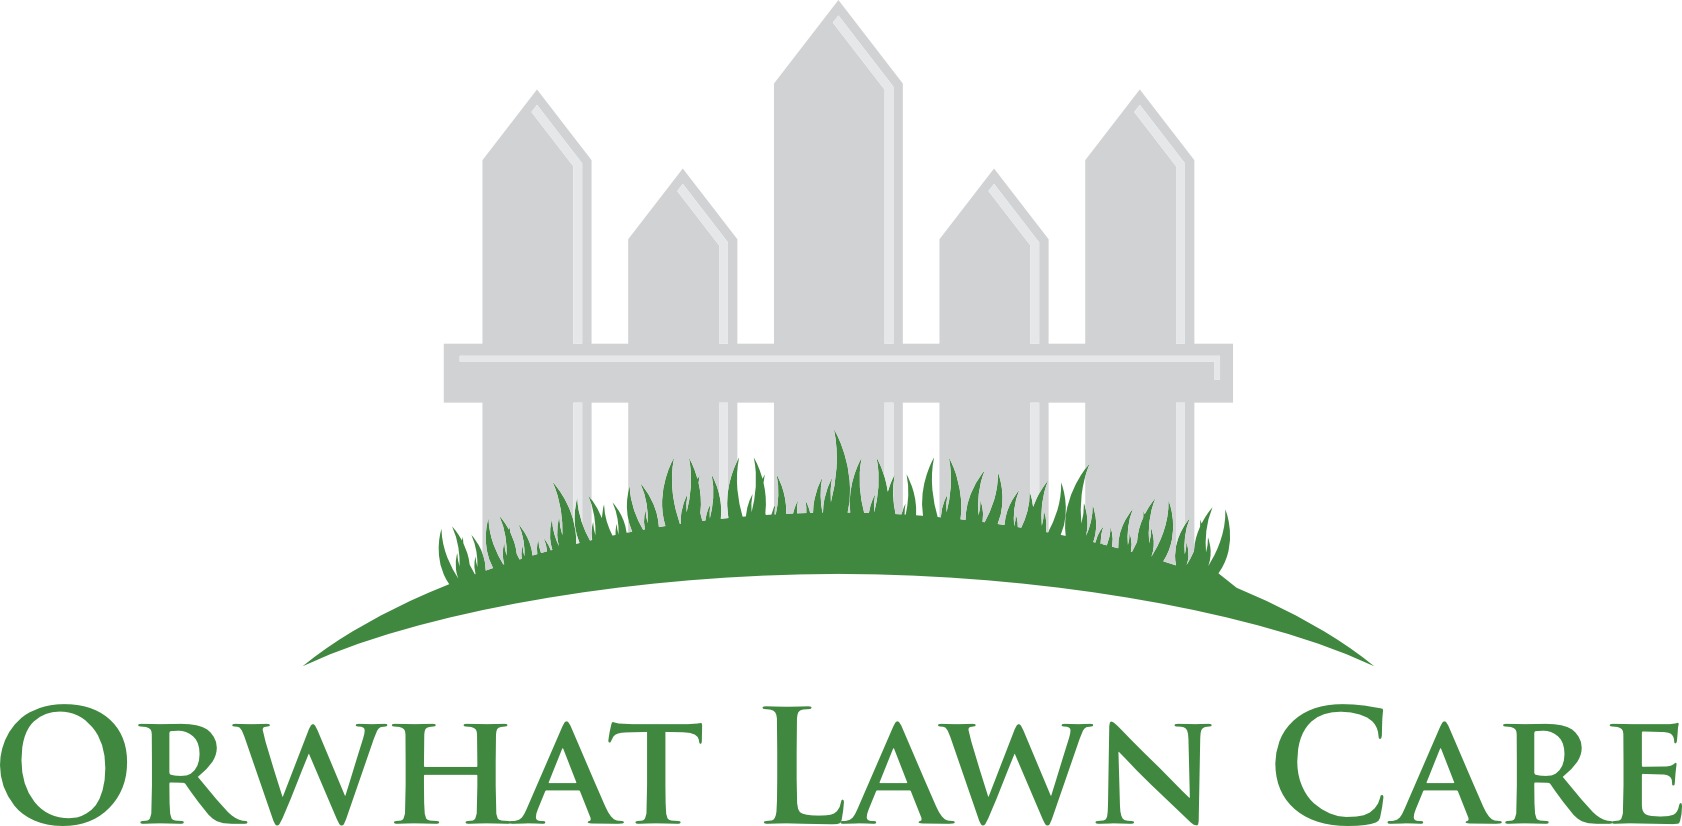 Orwhat Lawn Care Logo